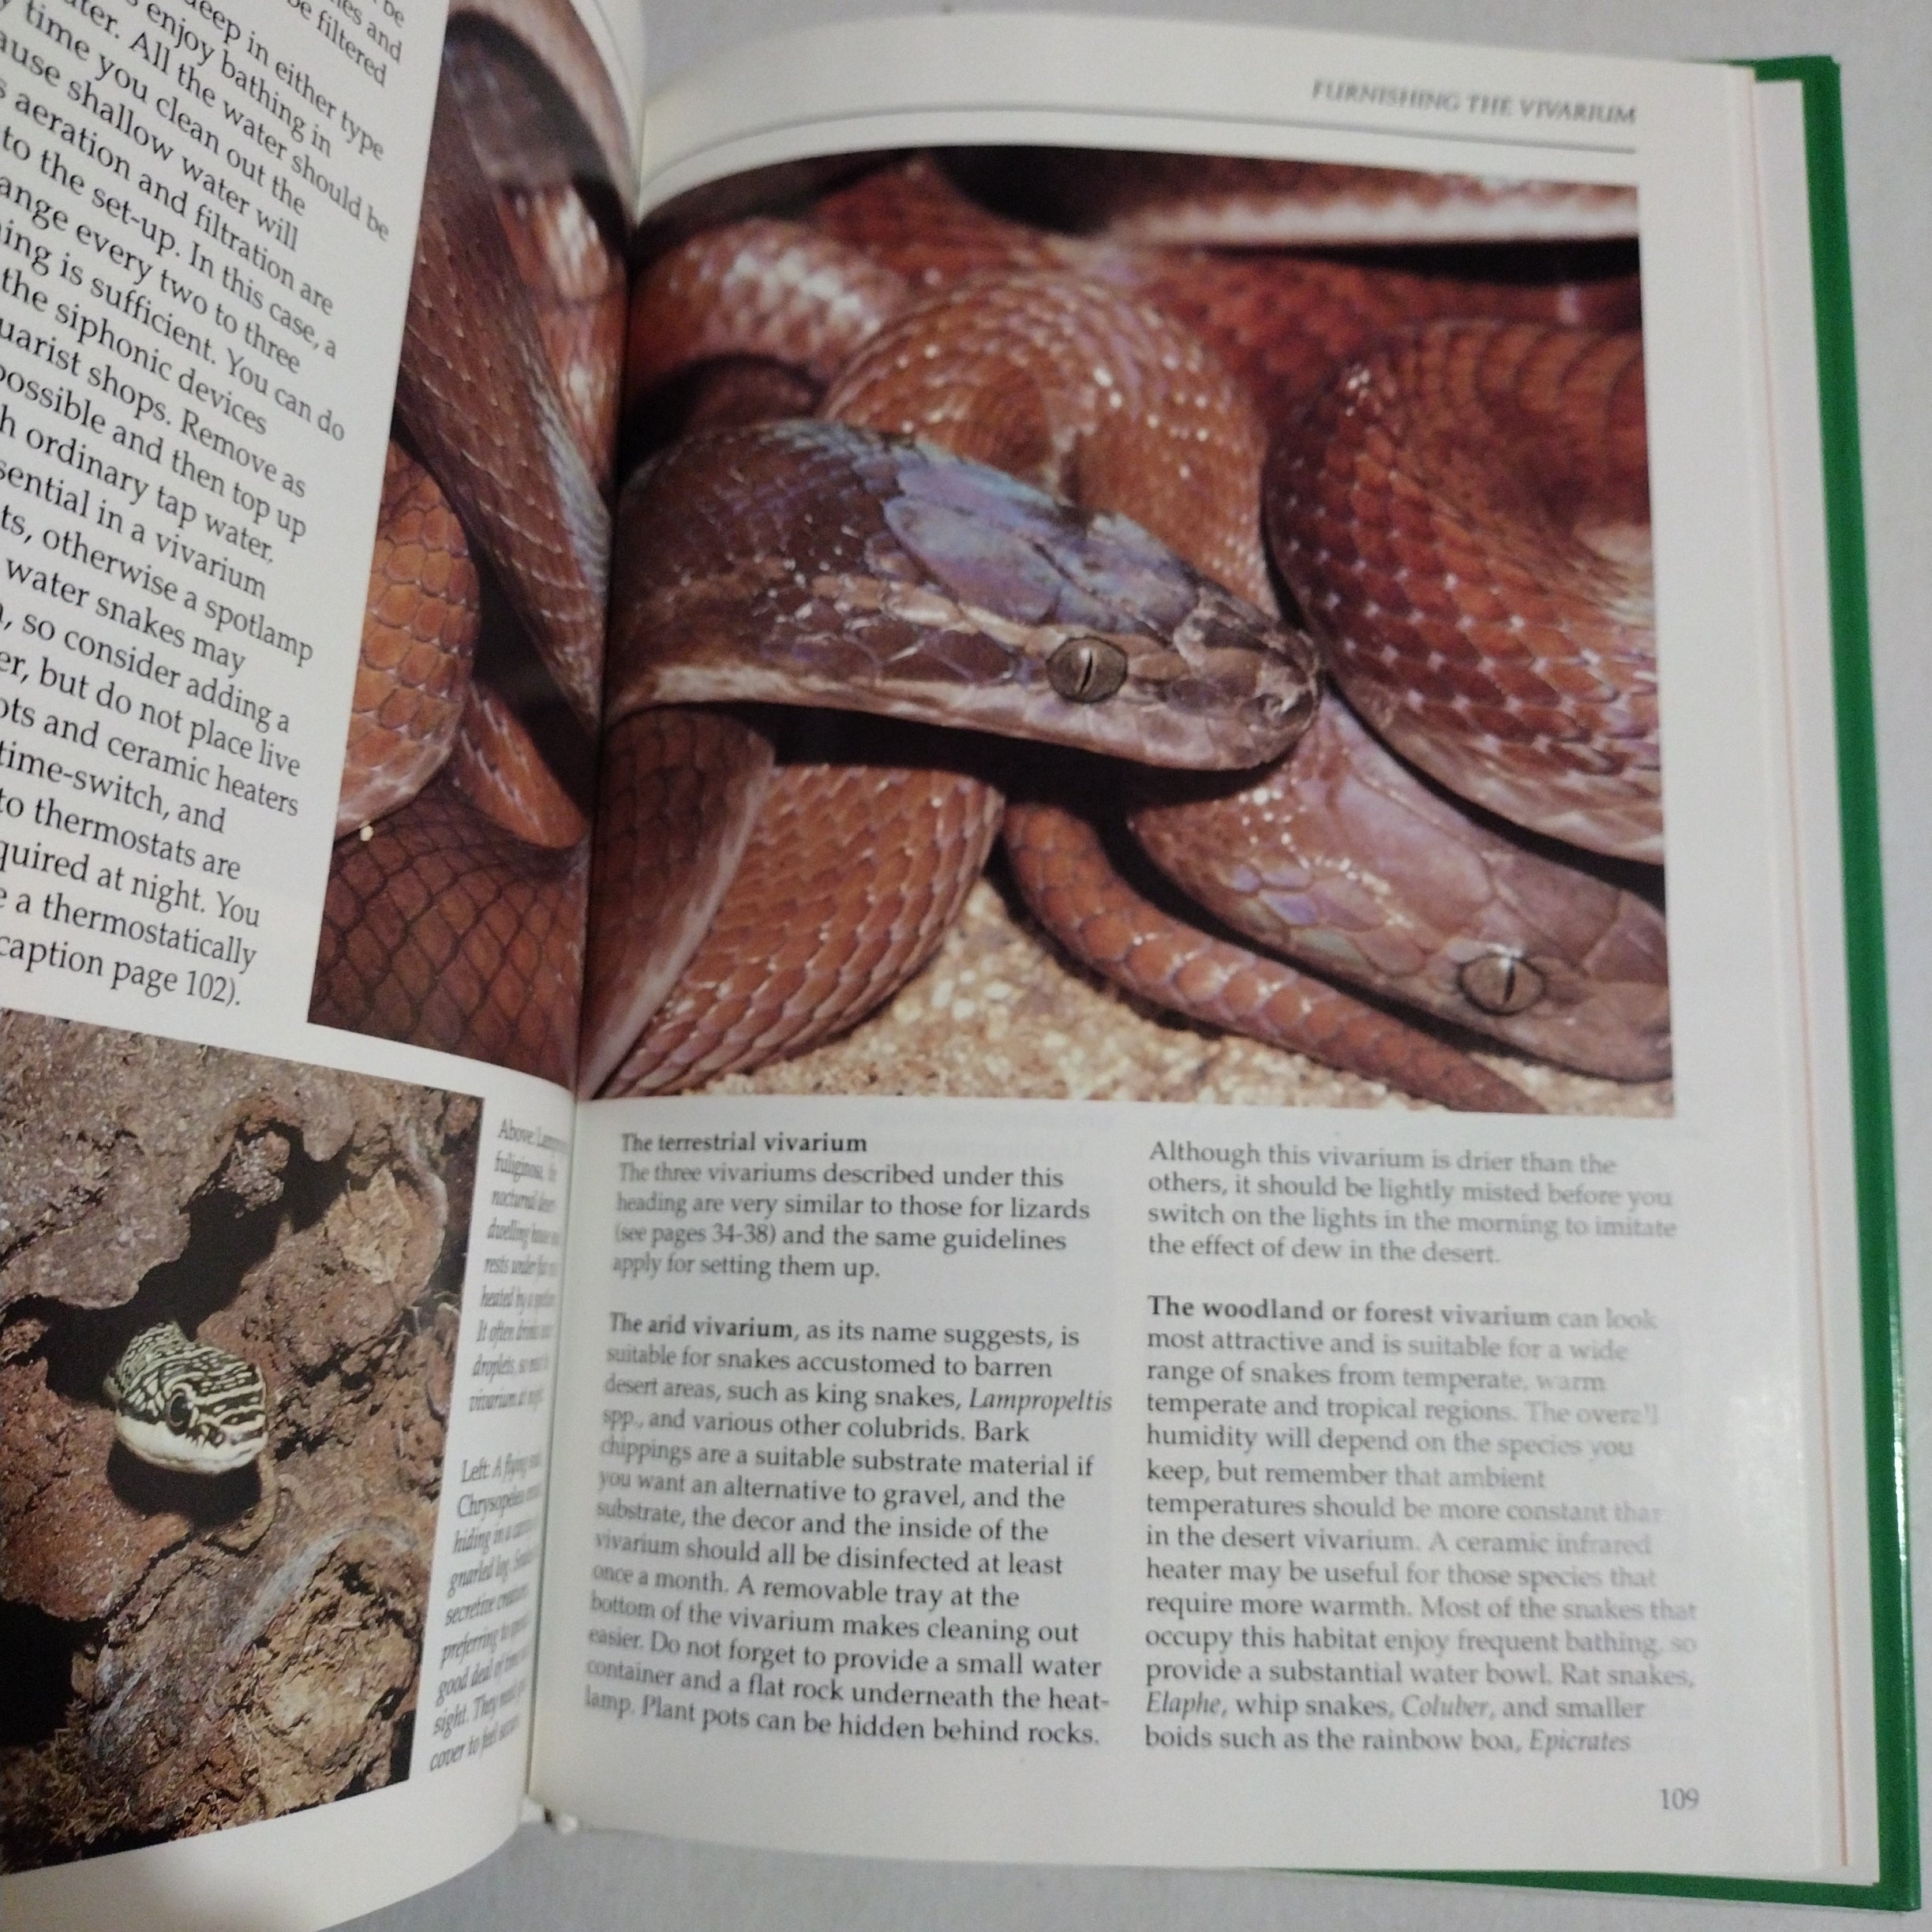 The interpet manual of lizards and snakes